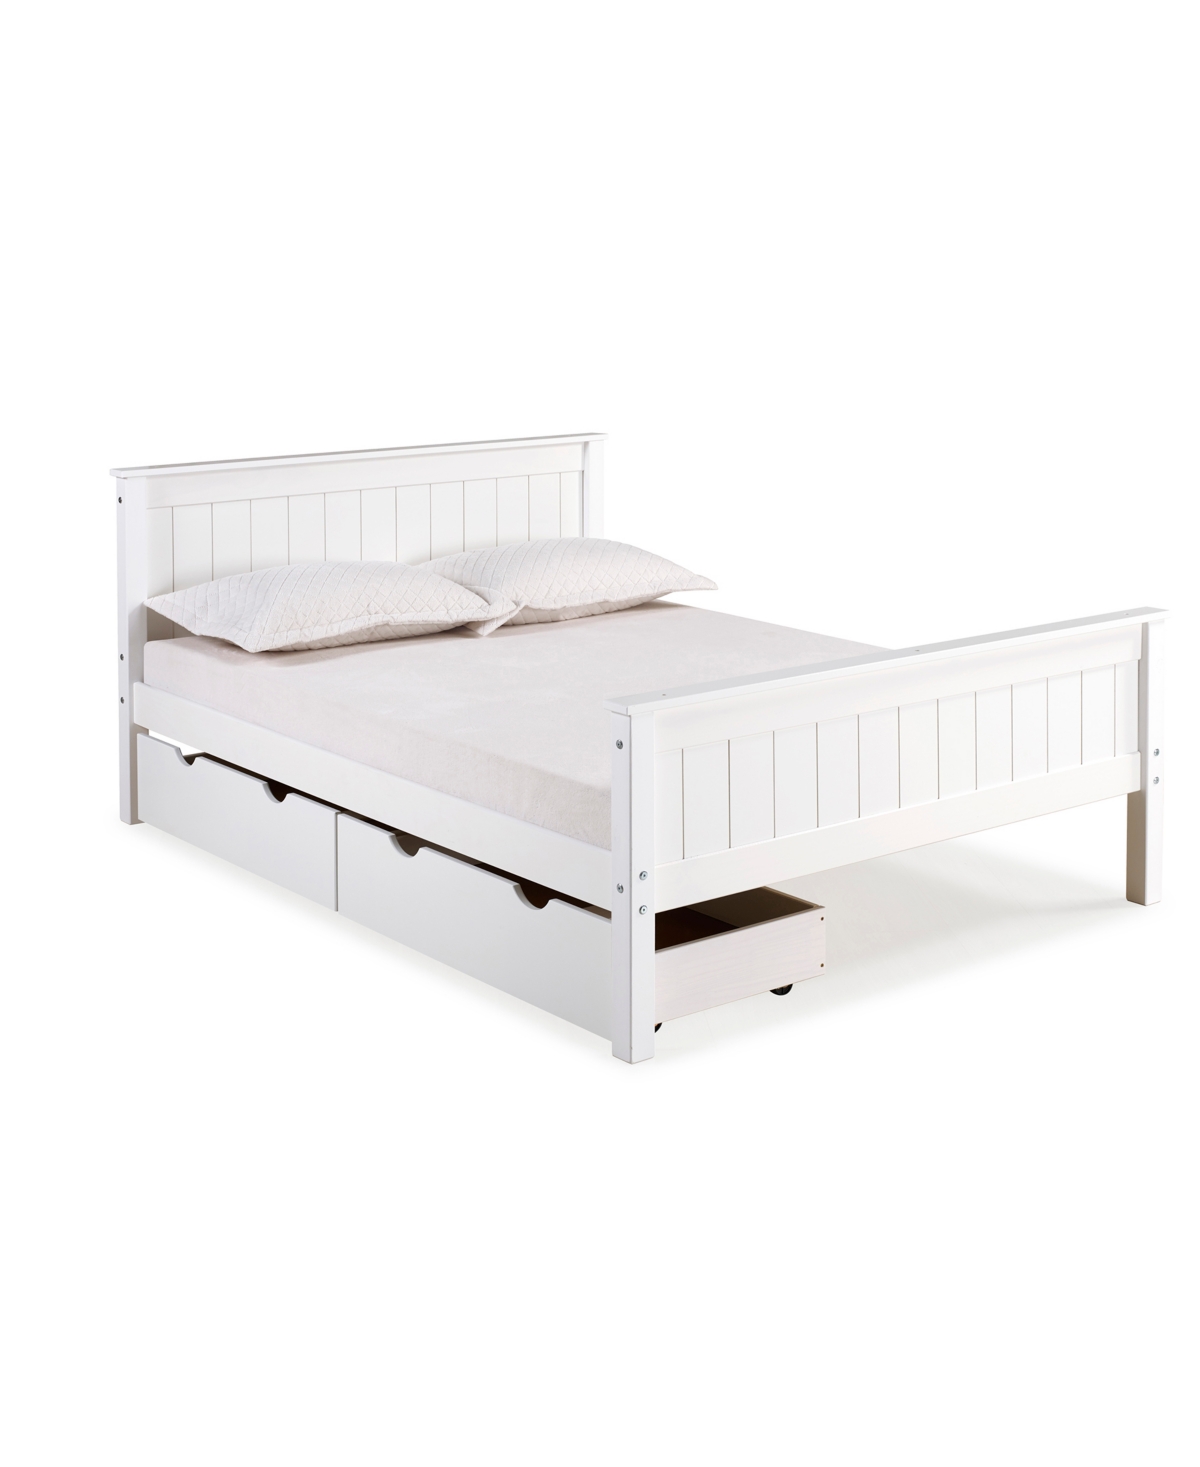 ALATERRE FURNITURE HARMONY FULL BED WITH STORAGE DRAWERS